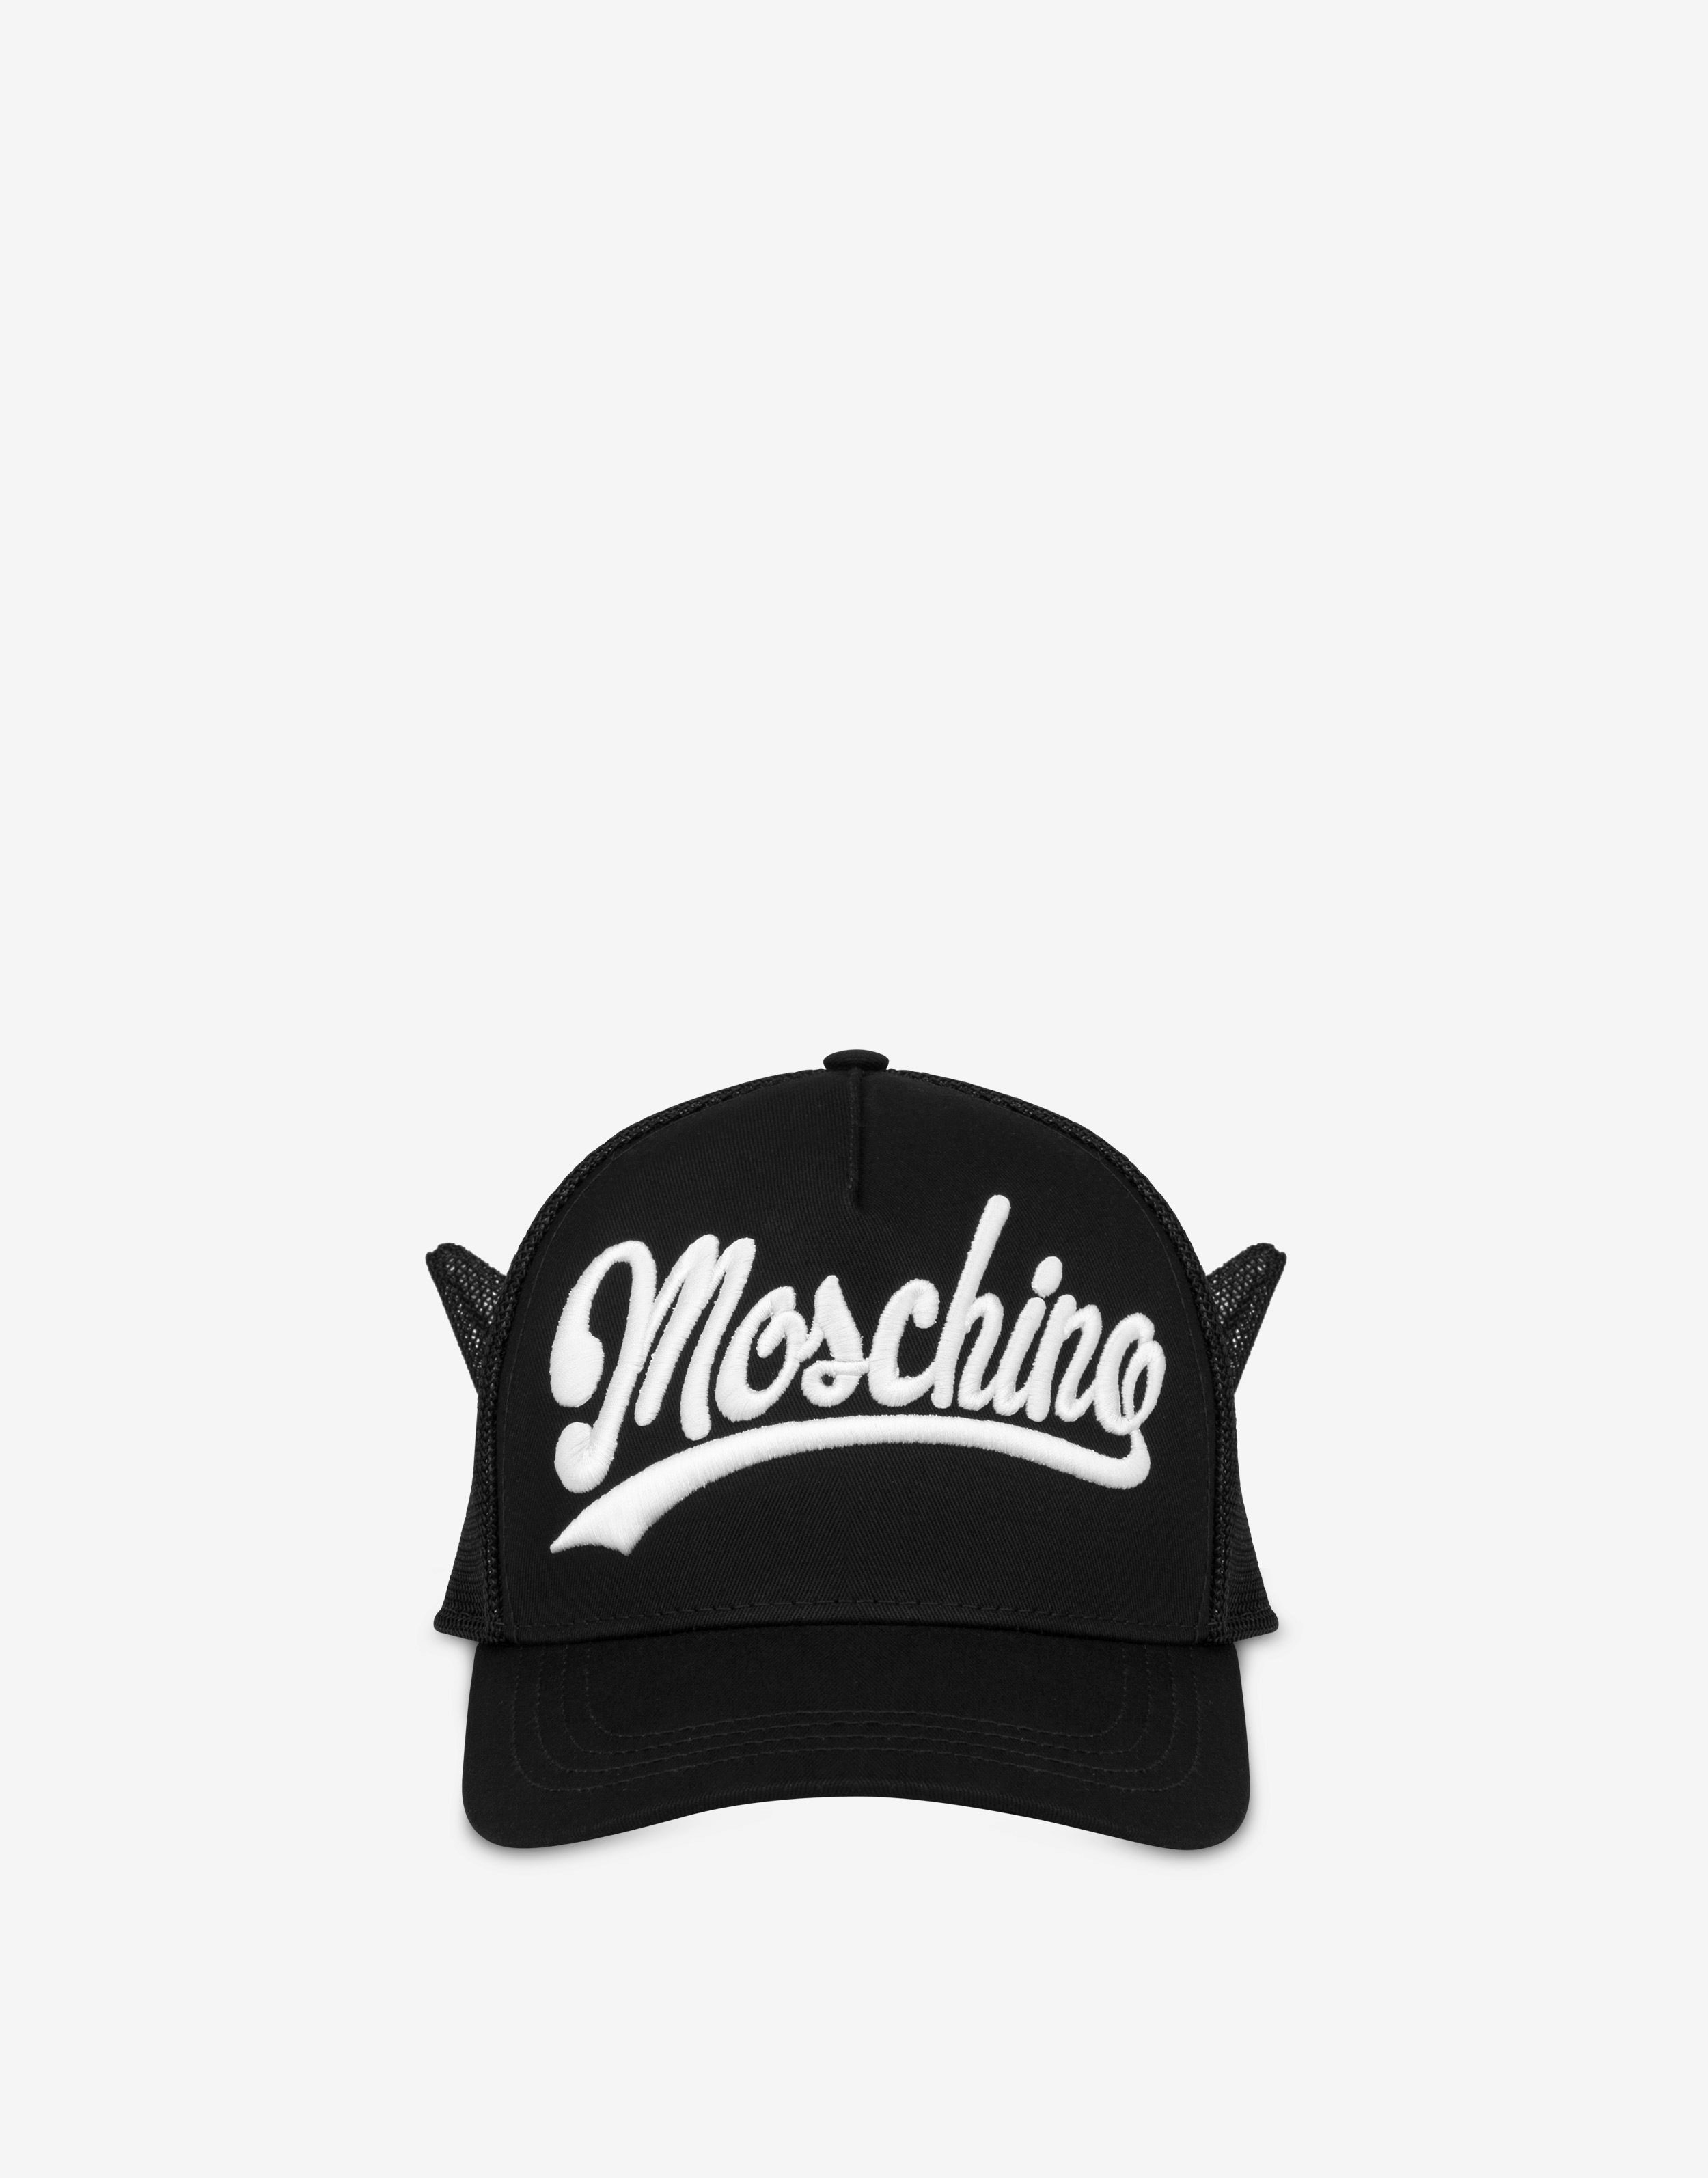 Moschino Hats & Gloves - Men Accessories | Moschino Official Store